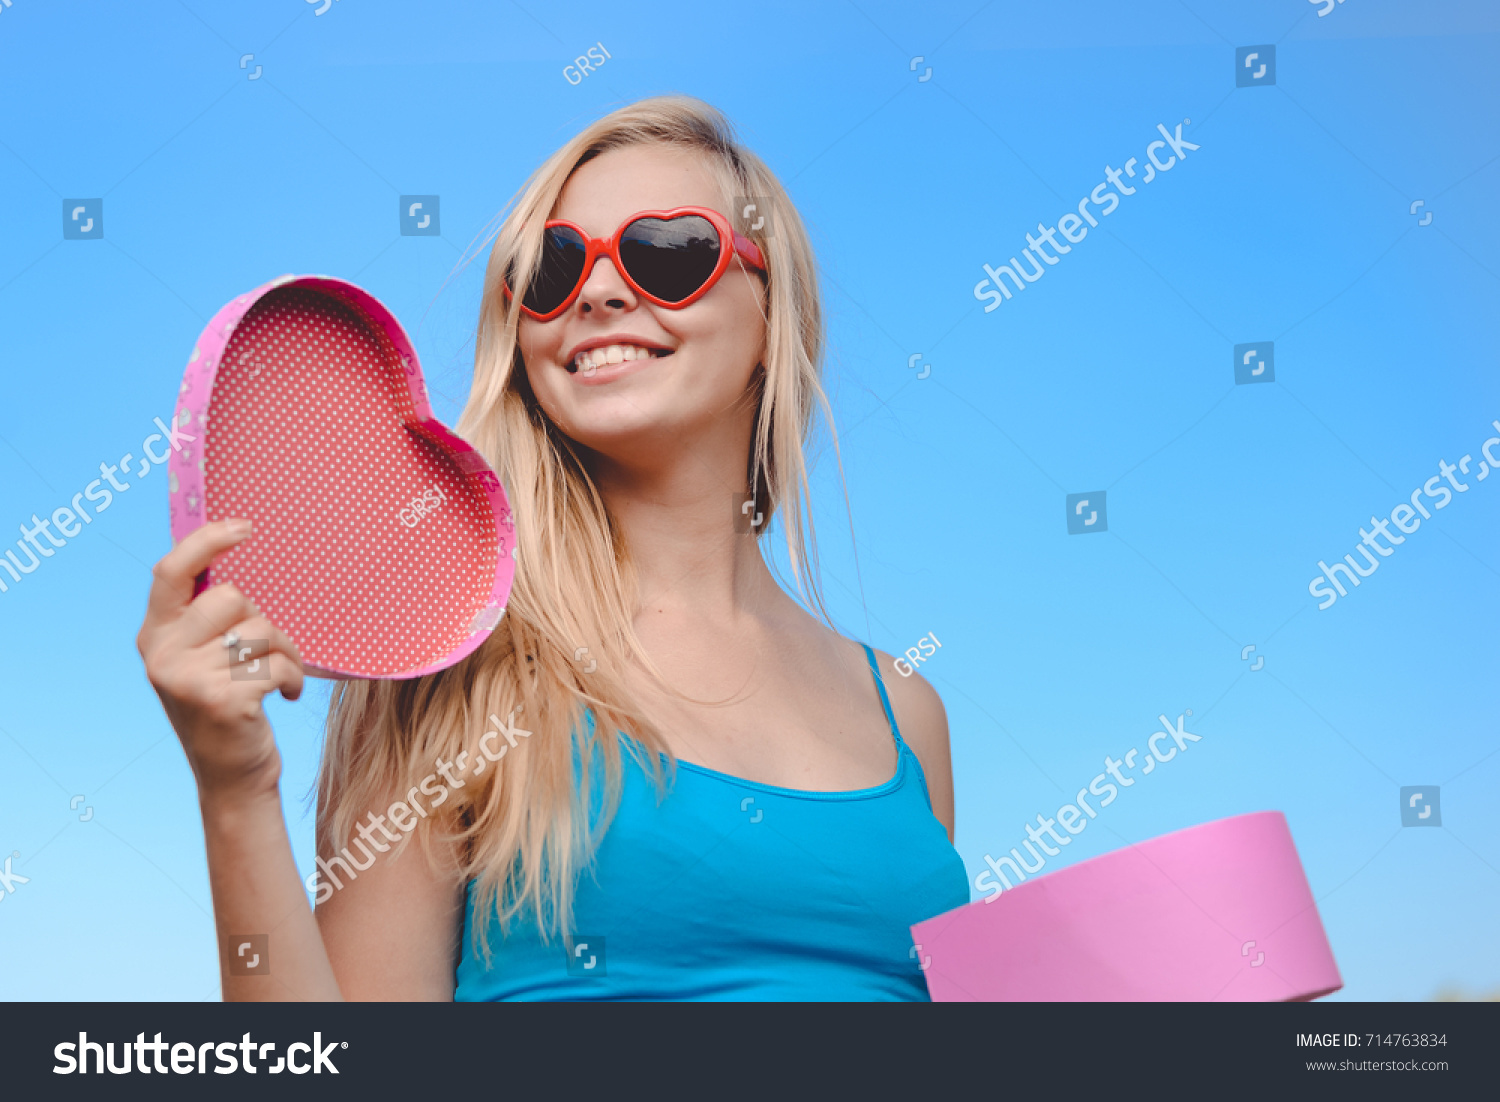 Joyful excited lovely woman holding heart shaped gift box in hands. Happy smiling surprised young lady over light blue sky background. Excitement beauty celebrating moment #714763834